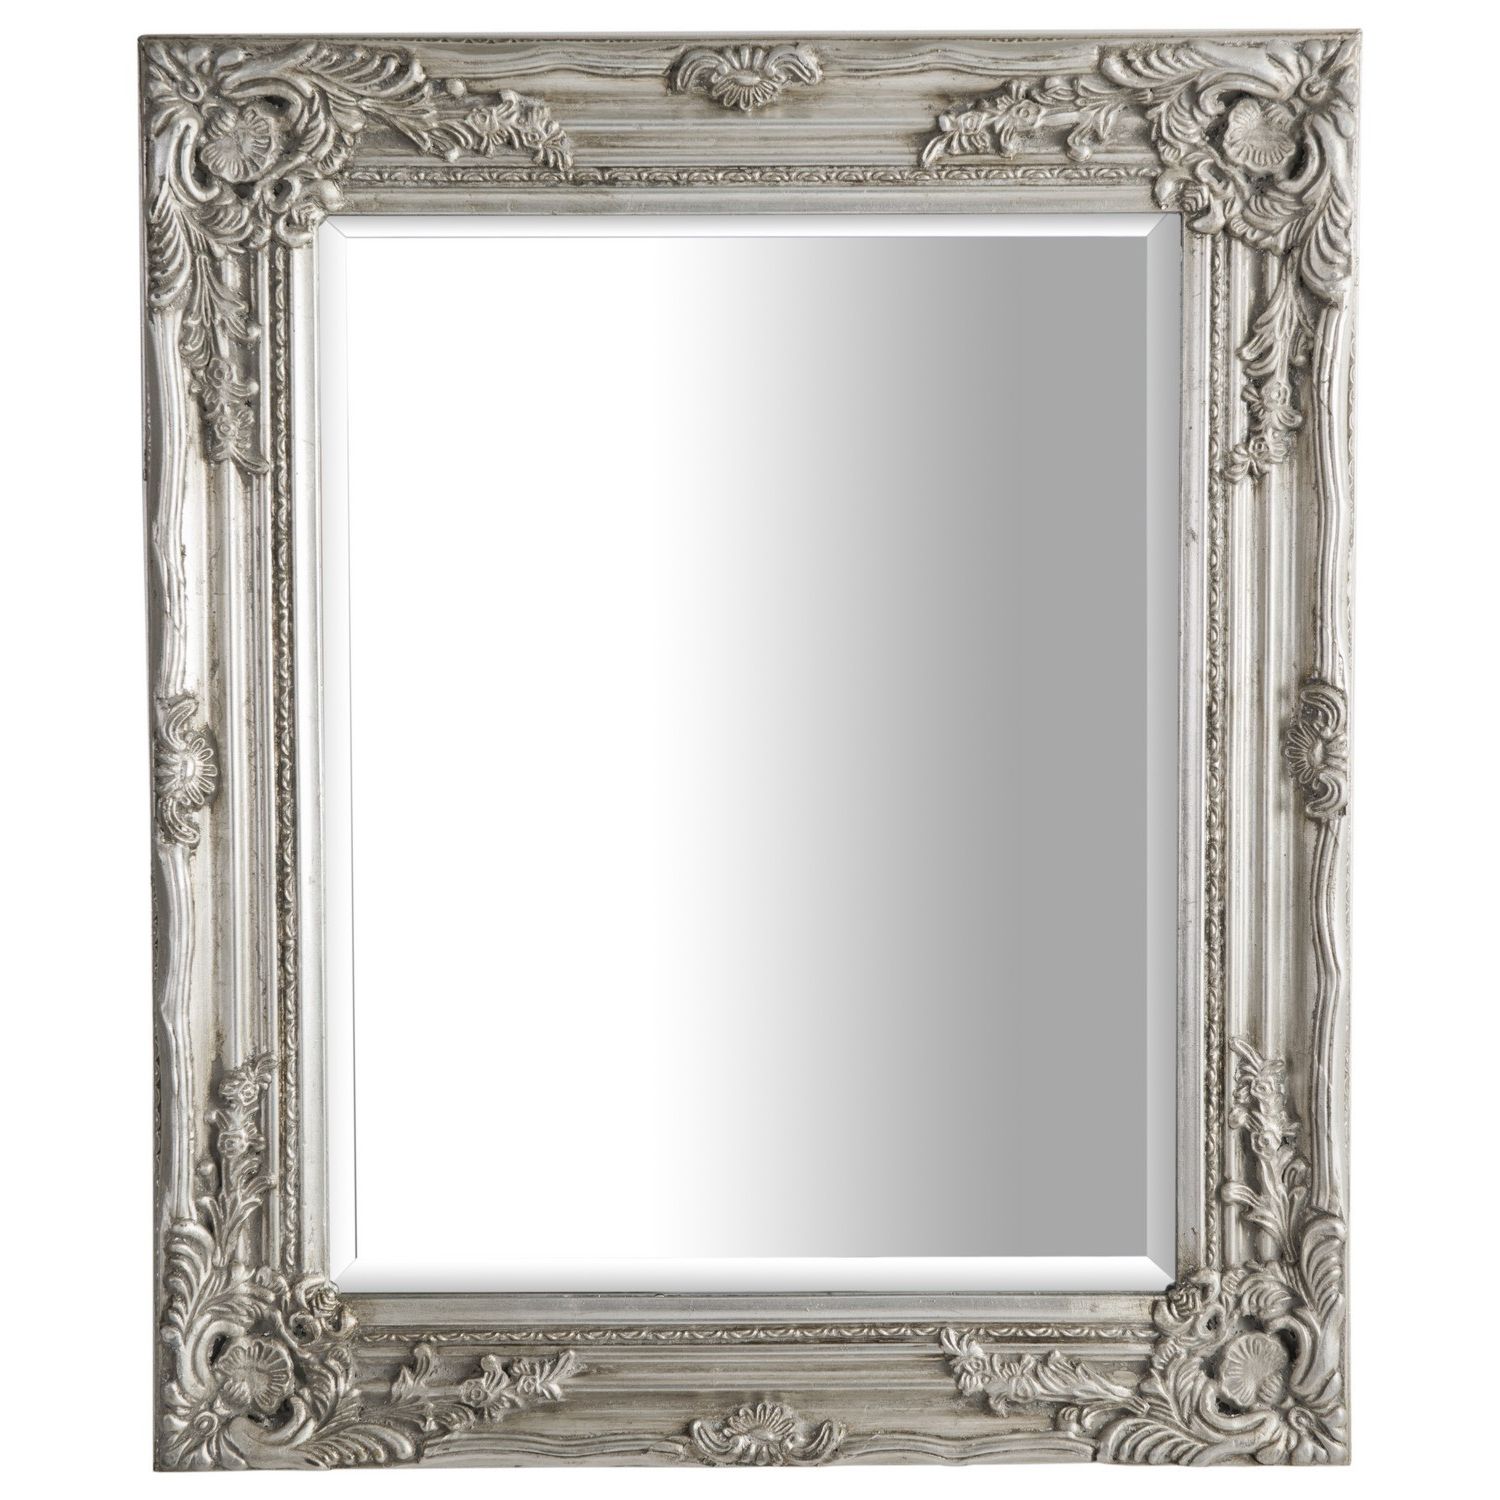 Well Liked Silver Antique Ornate Mirror Pertaining To Silver Wall Mirrors (View 13 of 20)